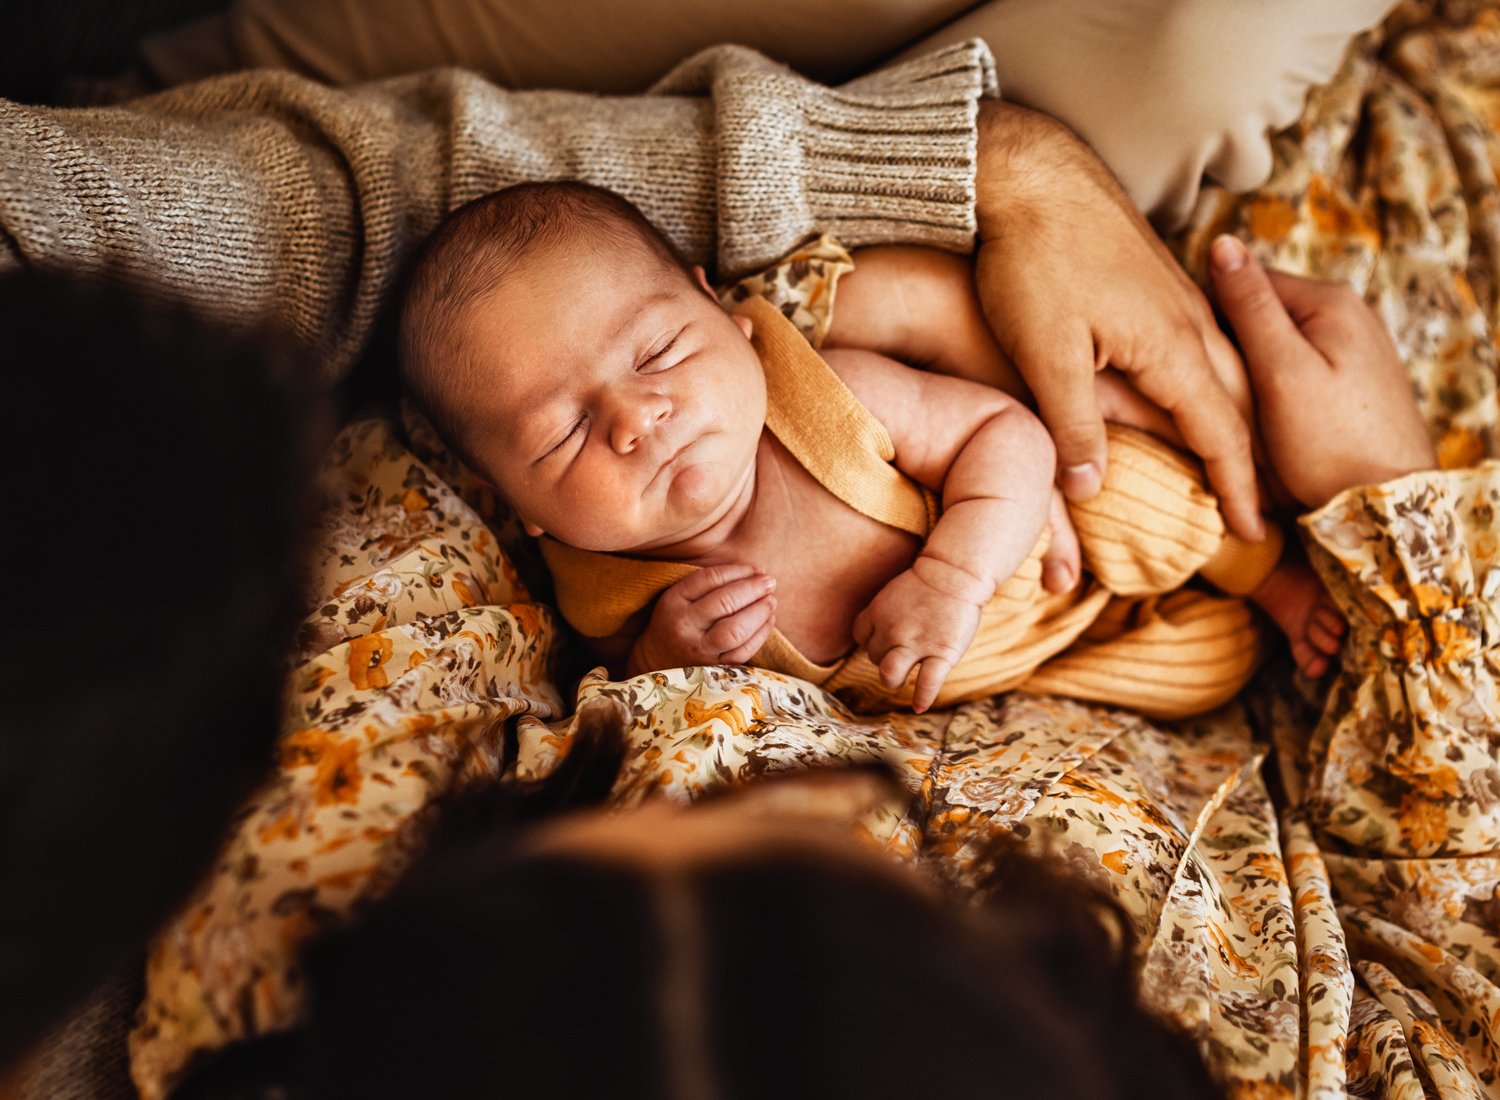 in-home-lifestyle-newborn-photography-session-ramstein-germany (5).jpg